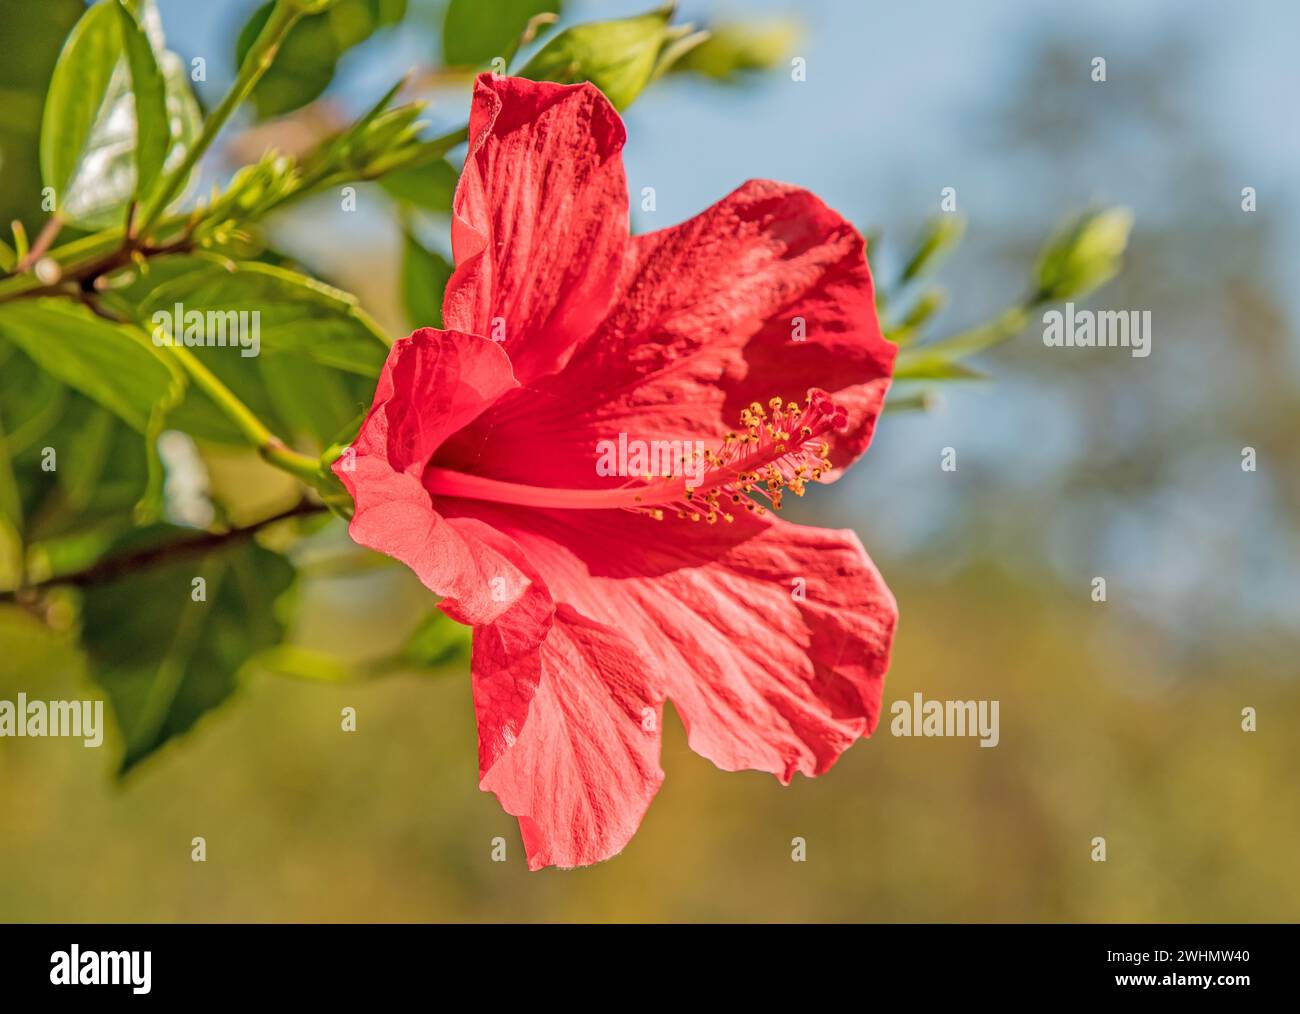 Chinese rose mallow 'Hibiscus rosa-sinensis' Stock Photo